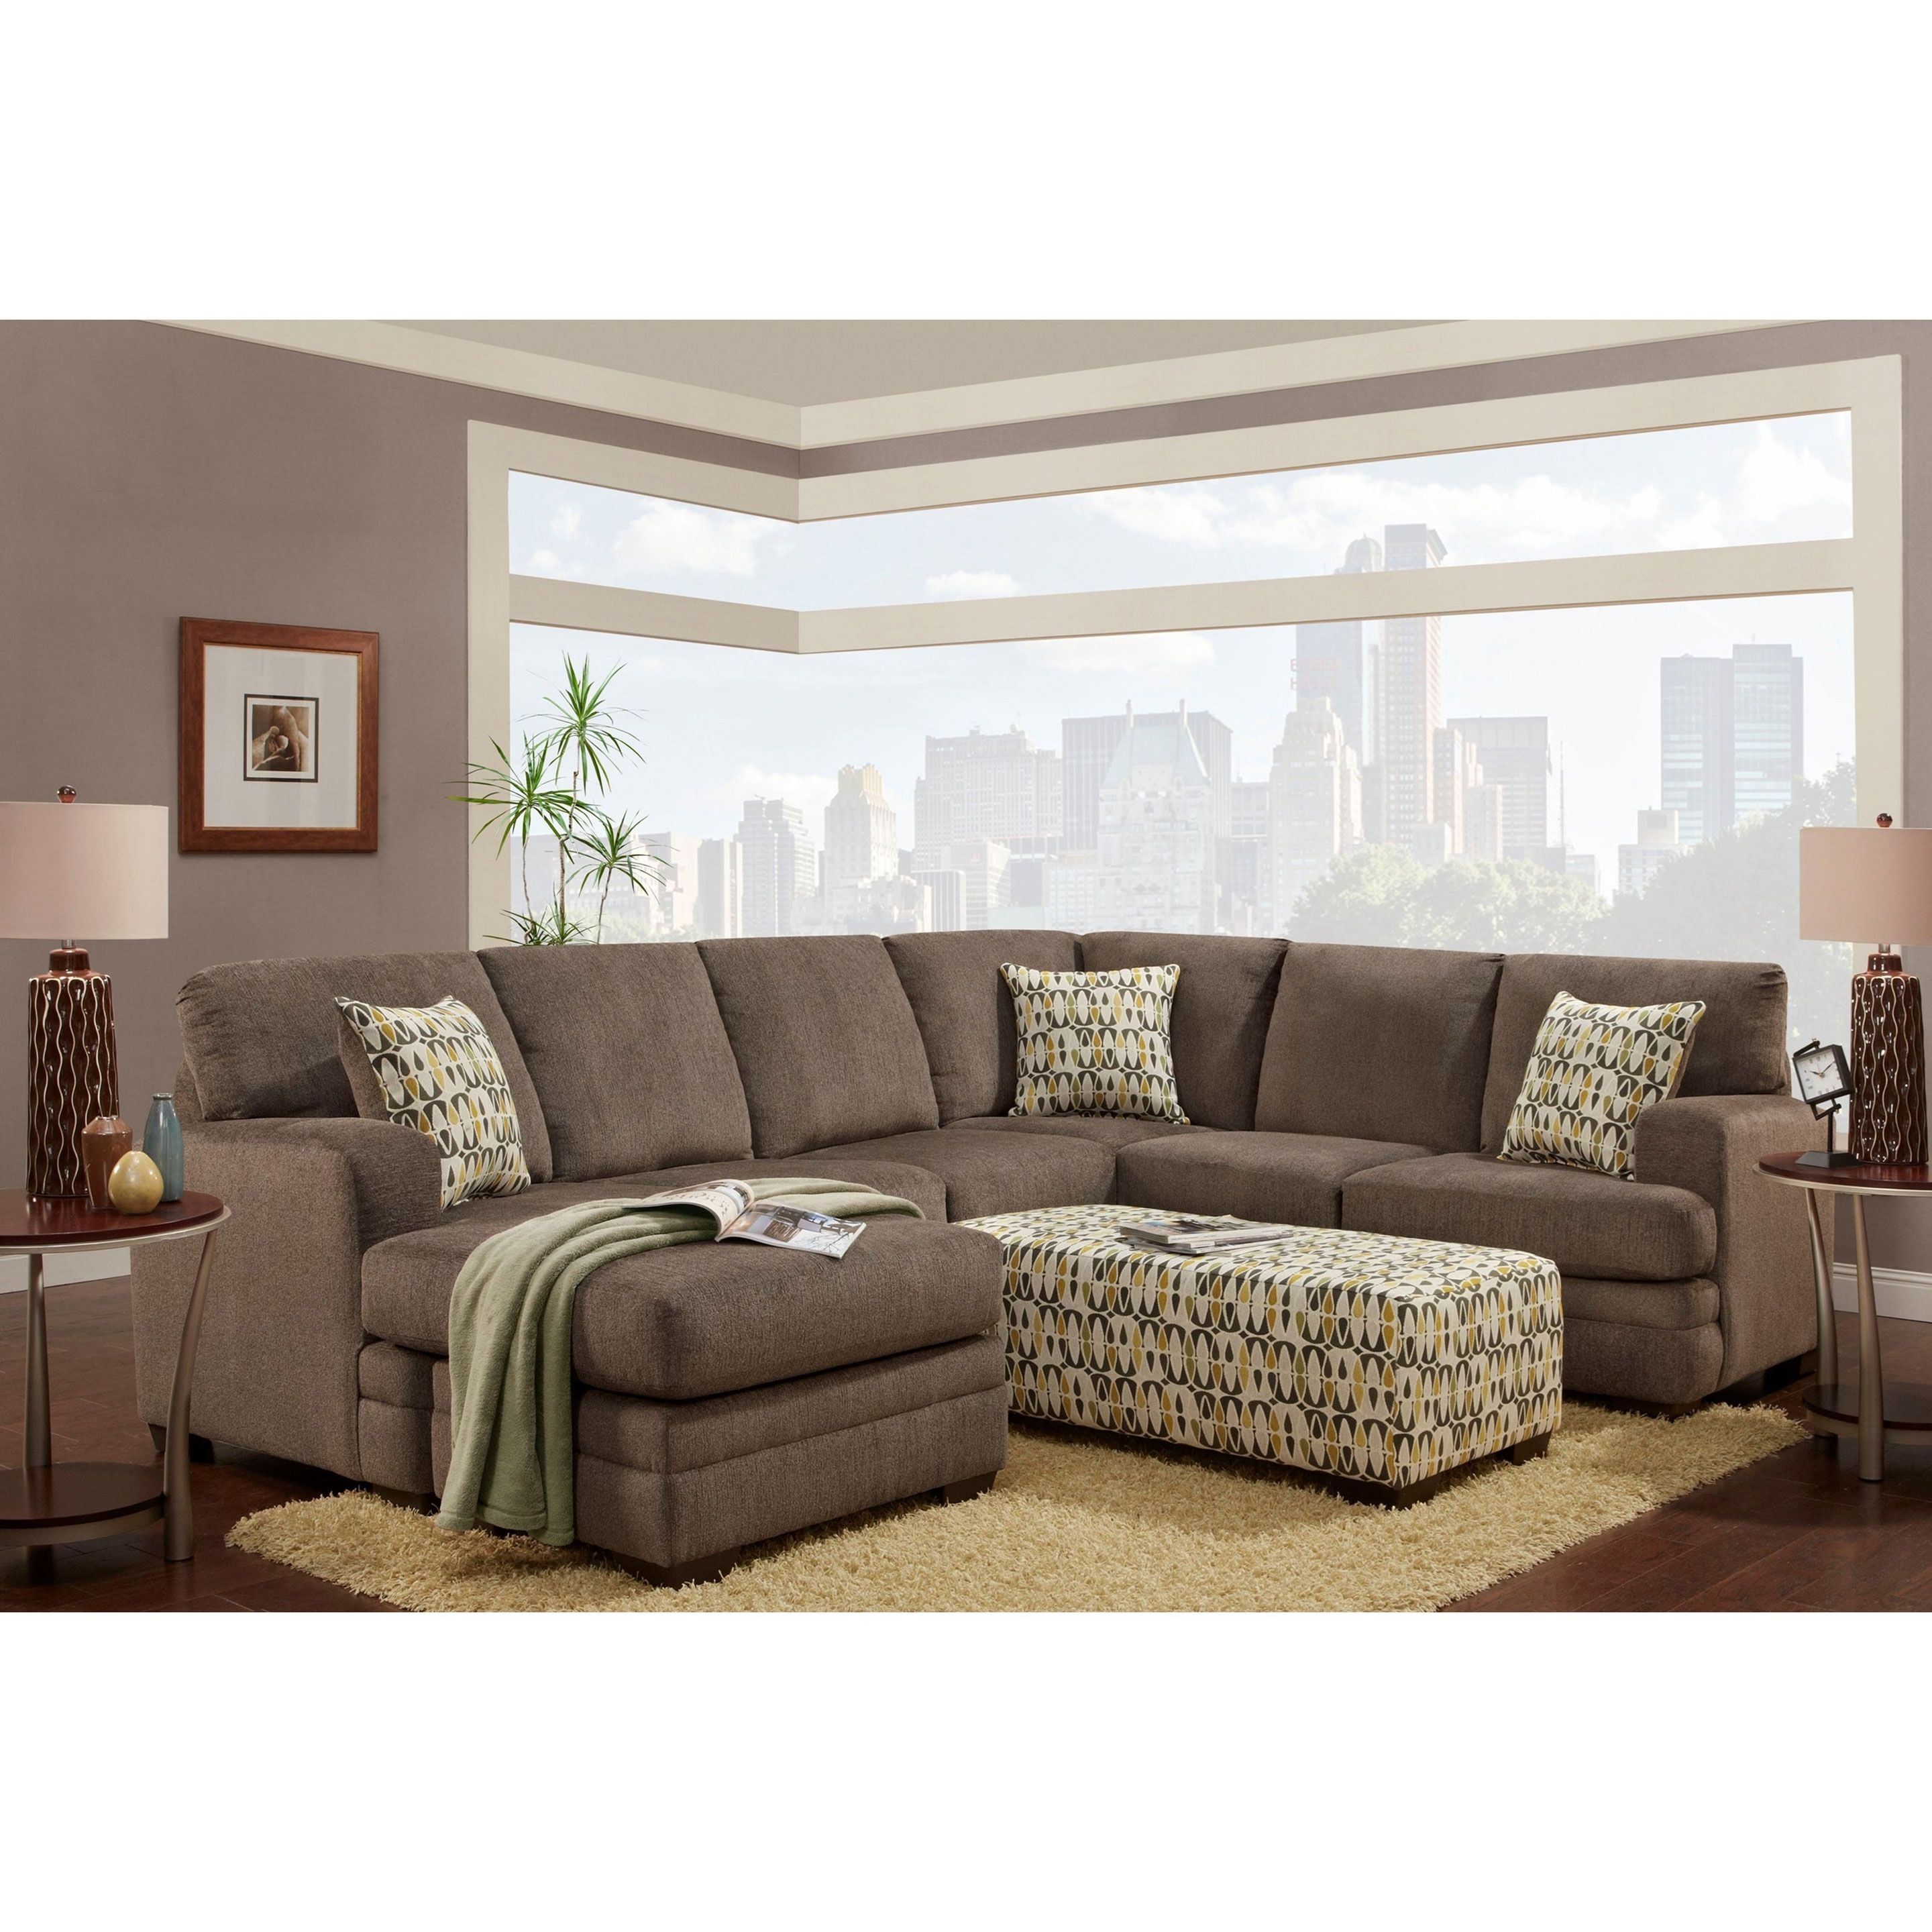 Featured Photo of 10 Best Ideas Phoenix Sectional Sofas